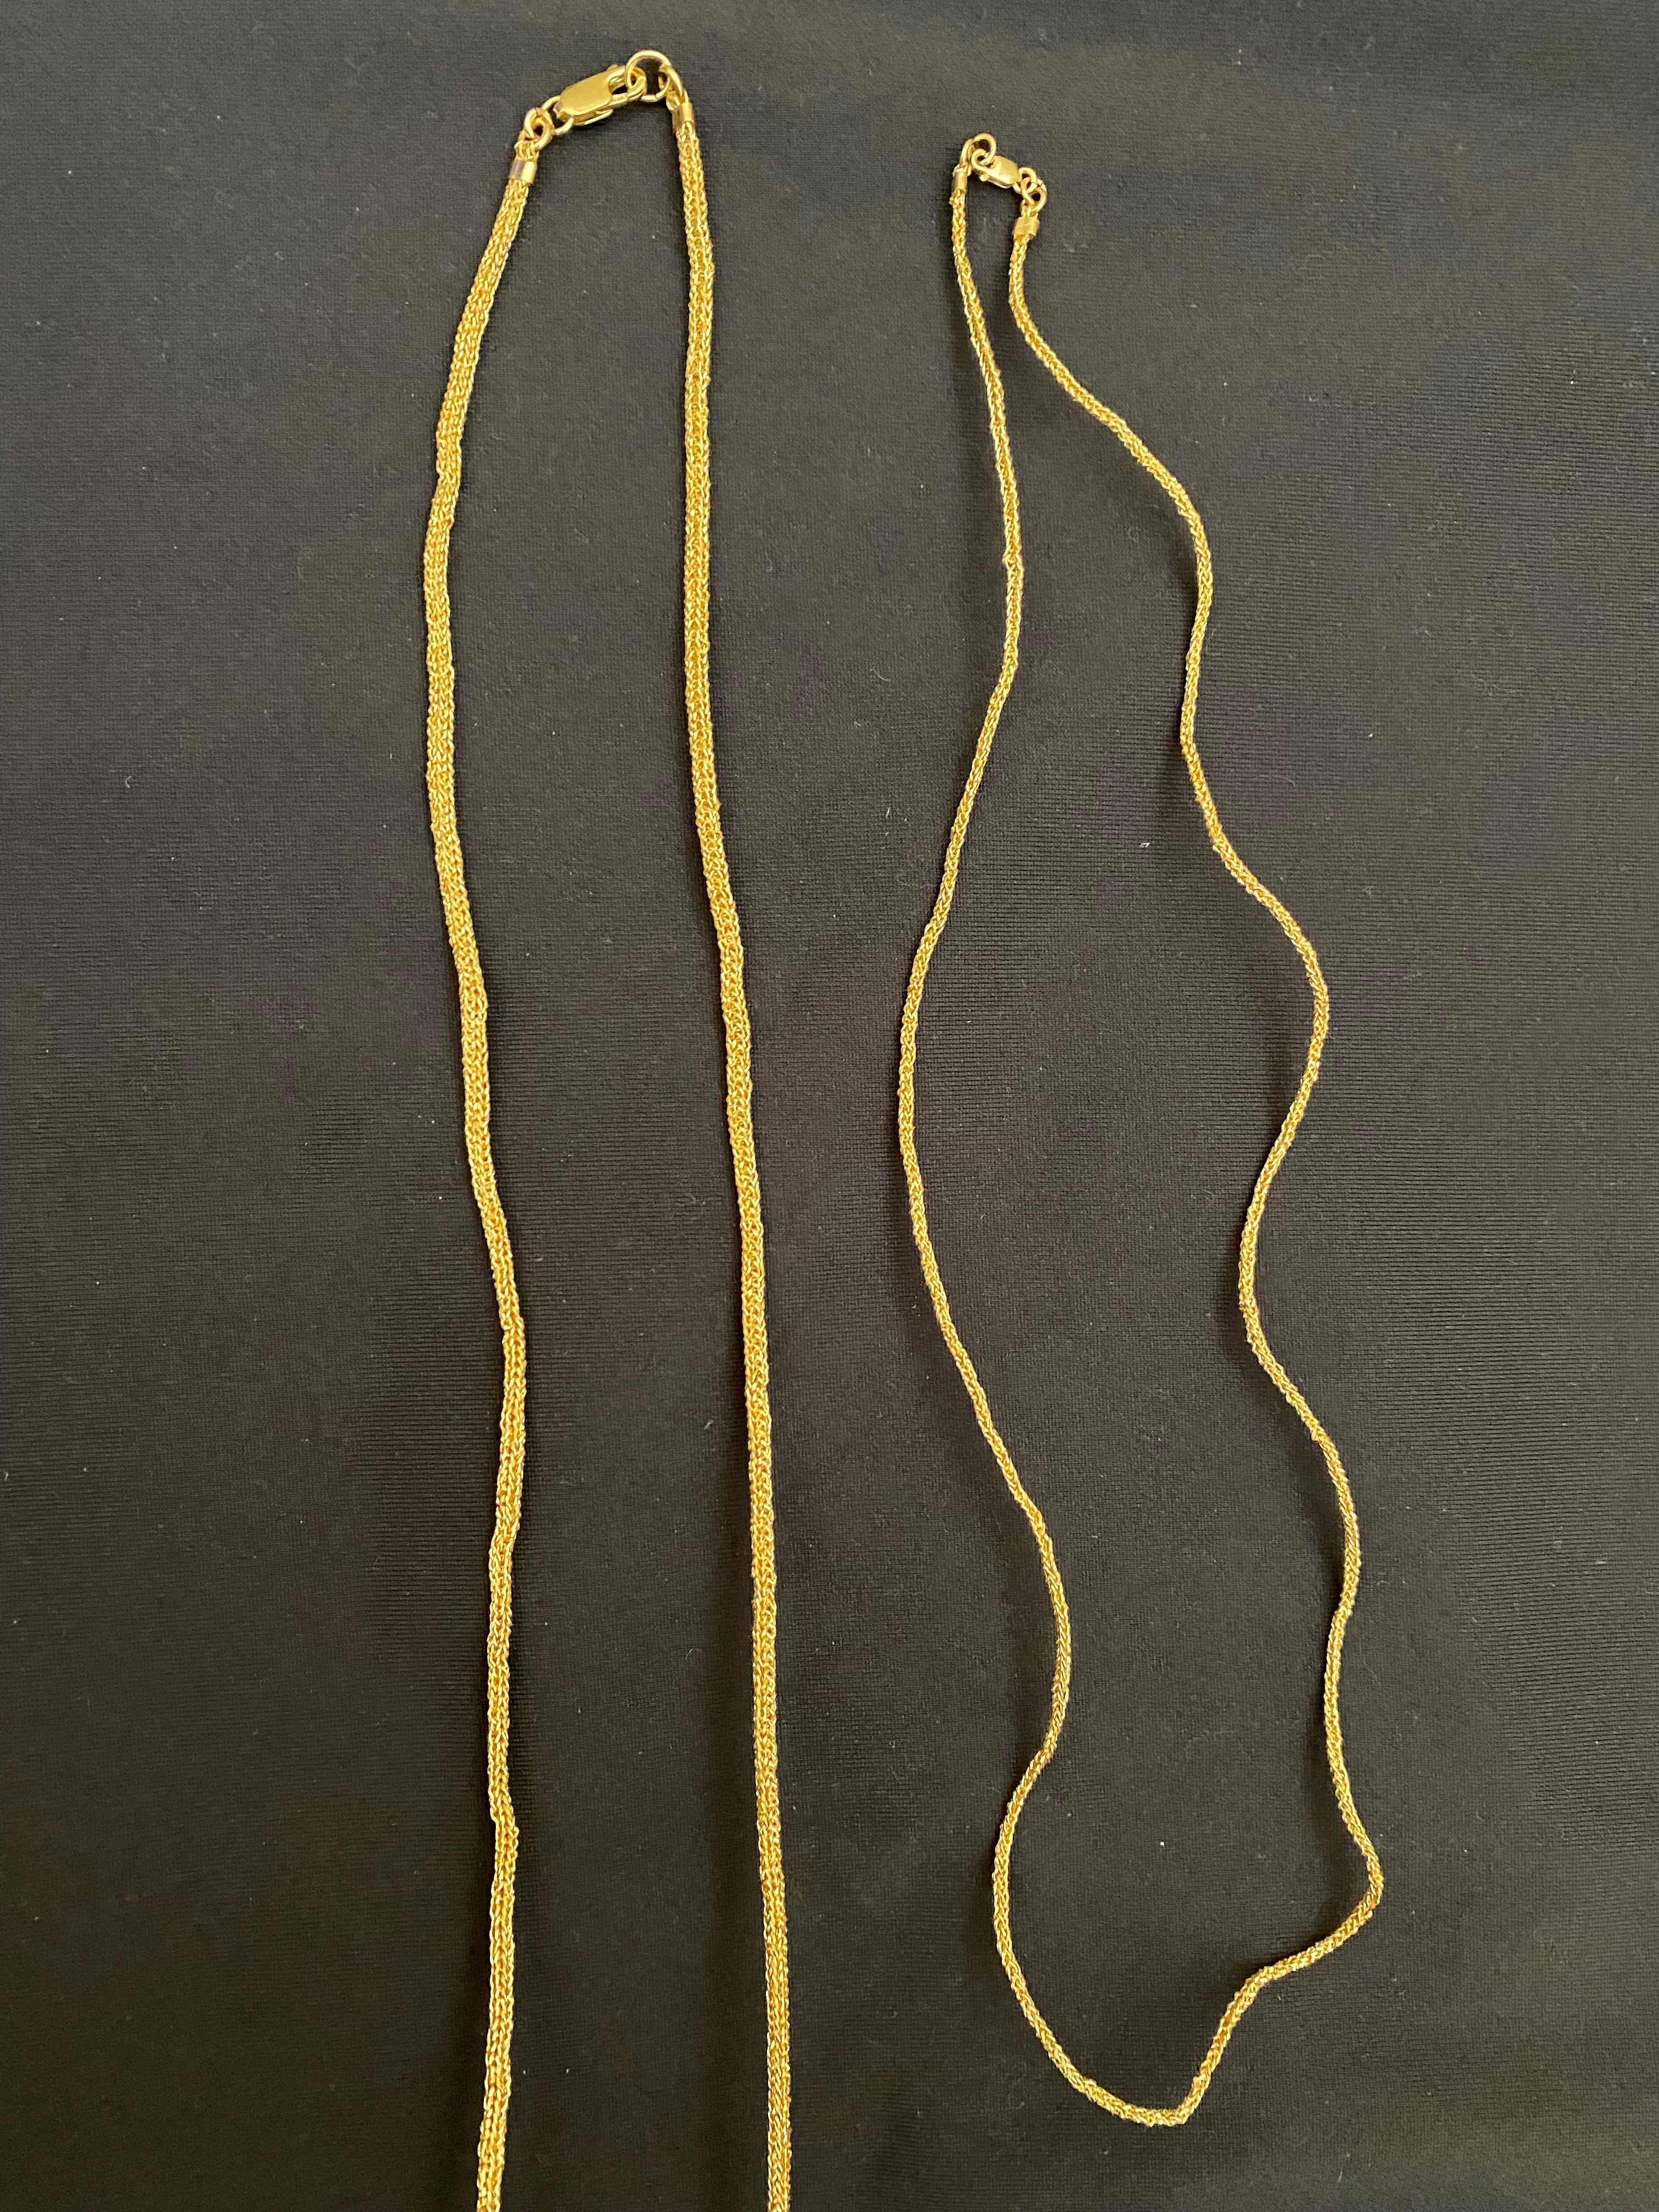 Gold cord